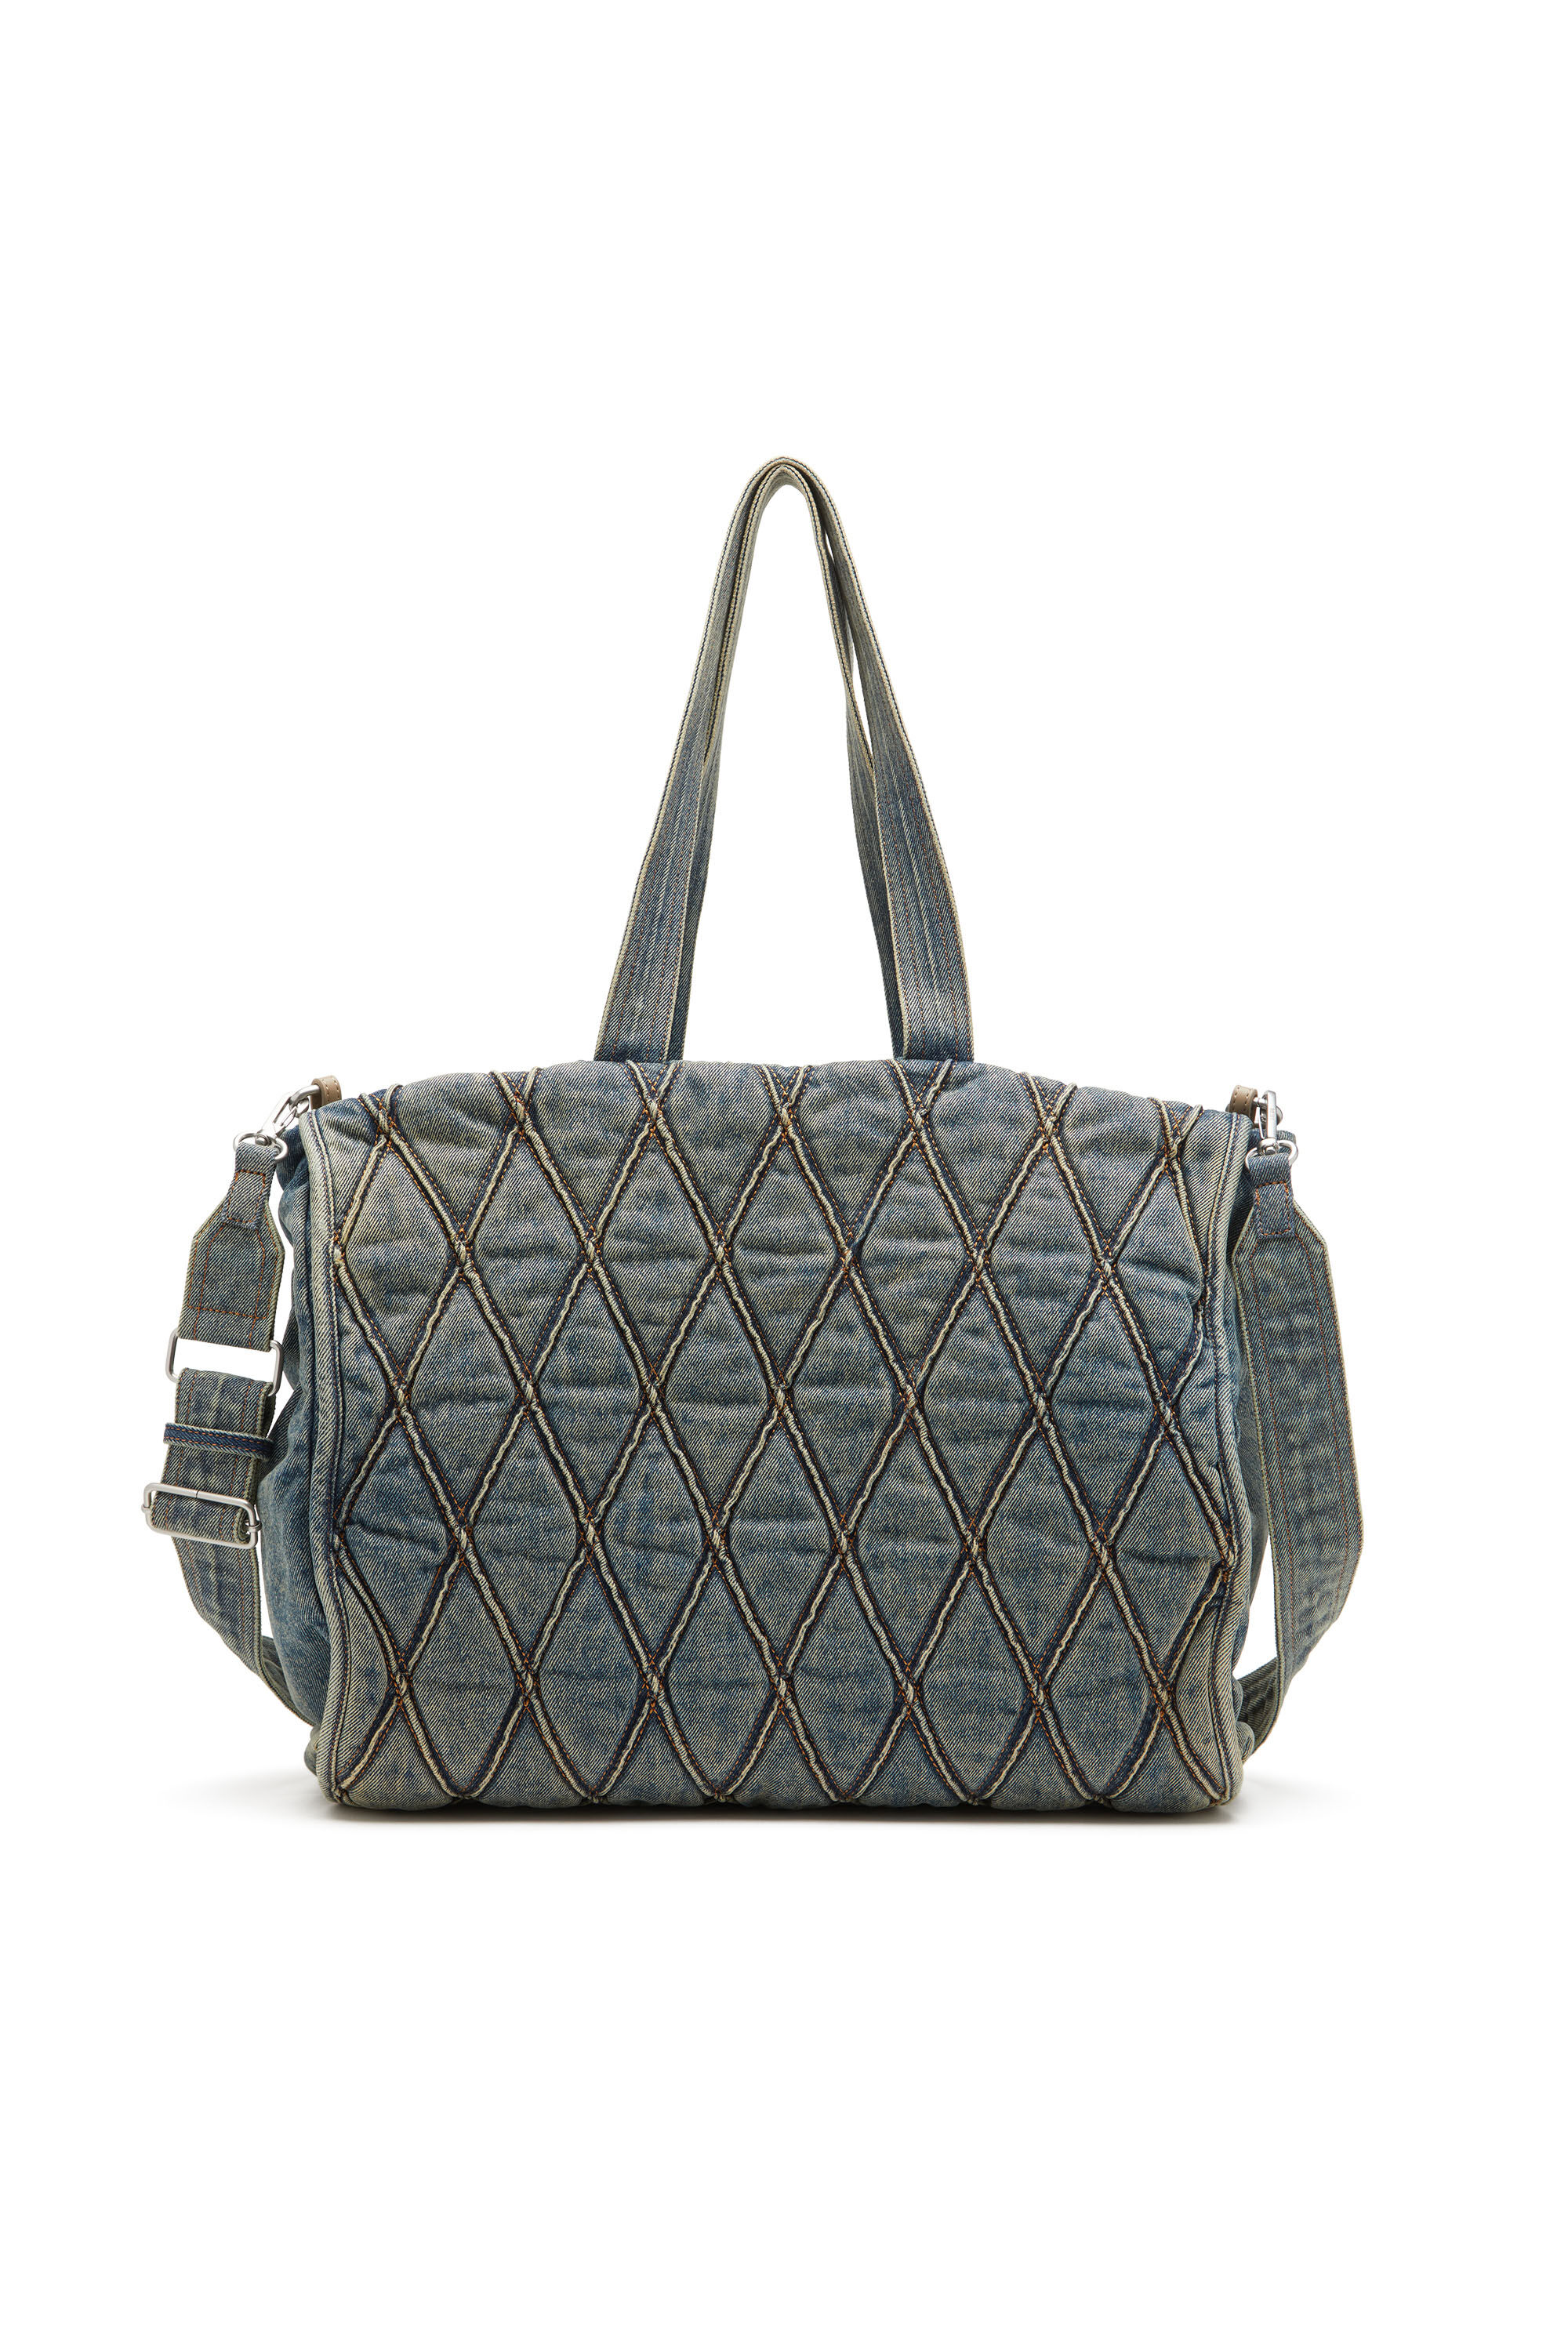 Diesel - CHARM-D SHOPPER, Woman Charm-D-Tote bag in Argyle quilted denim in Blue - Image 3